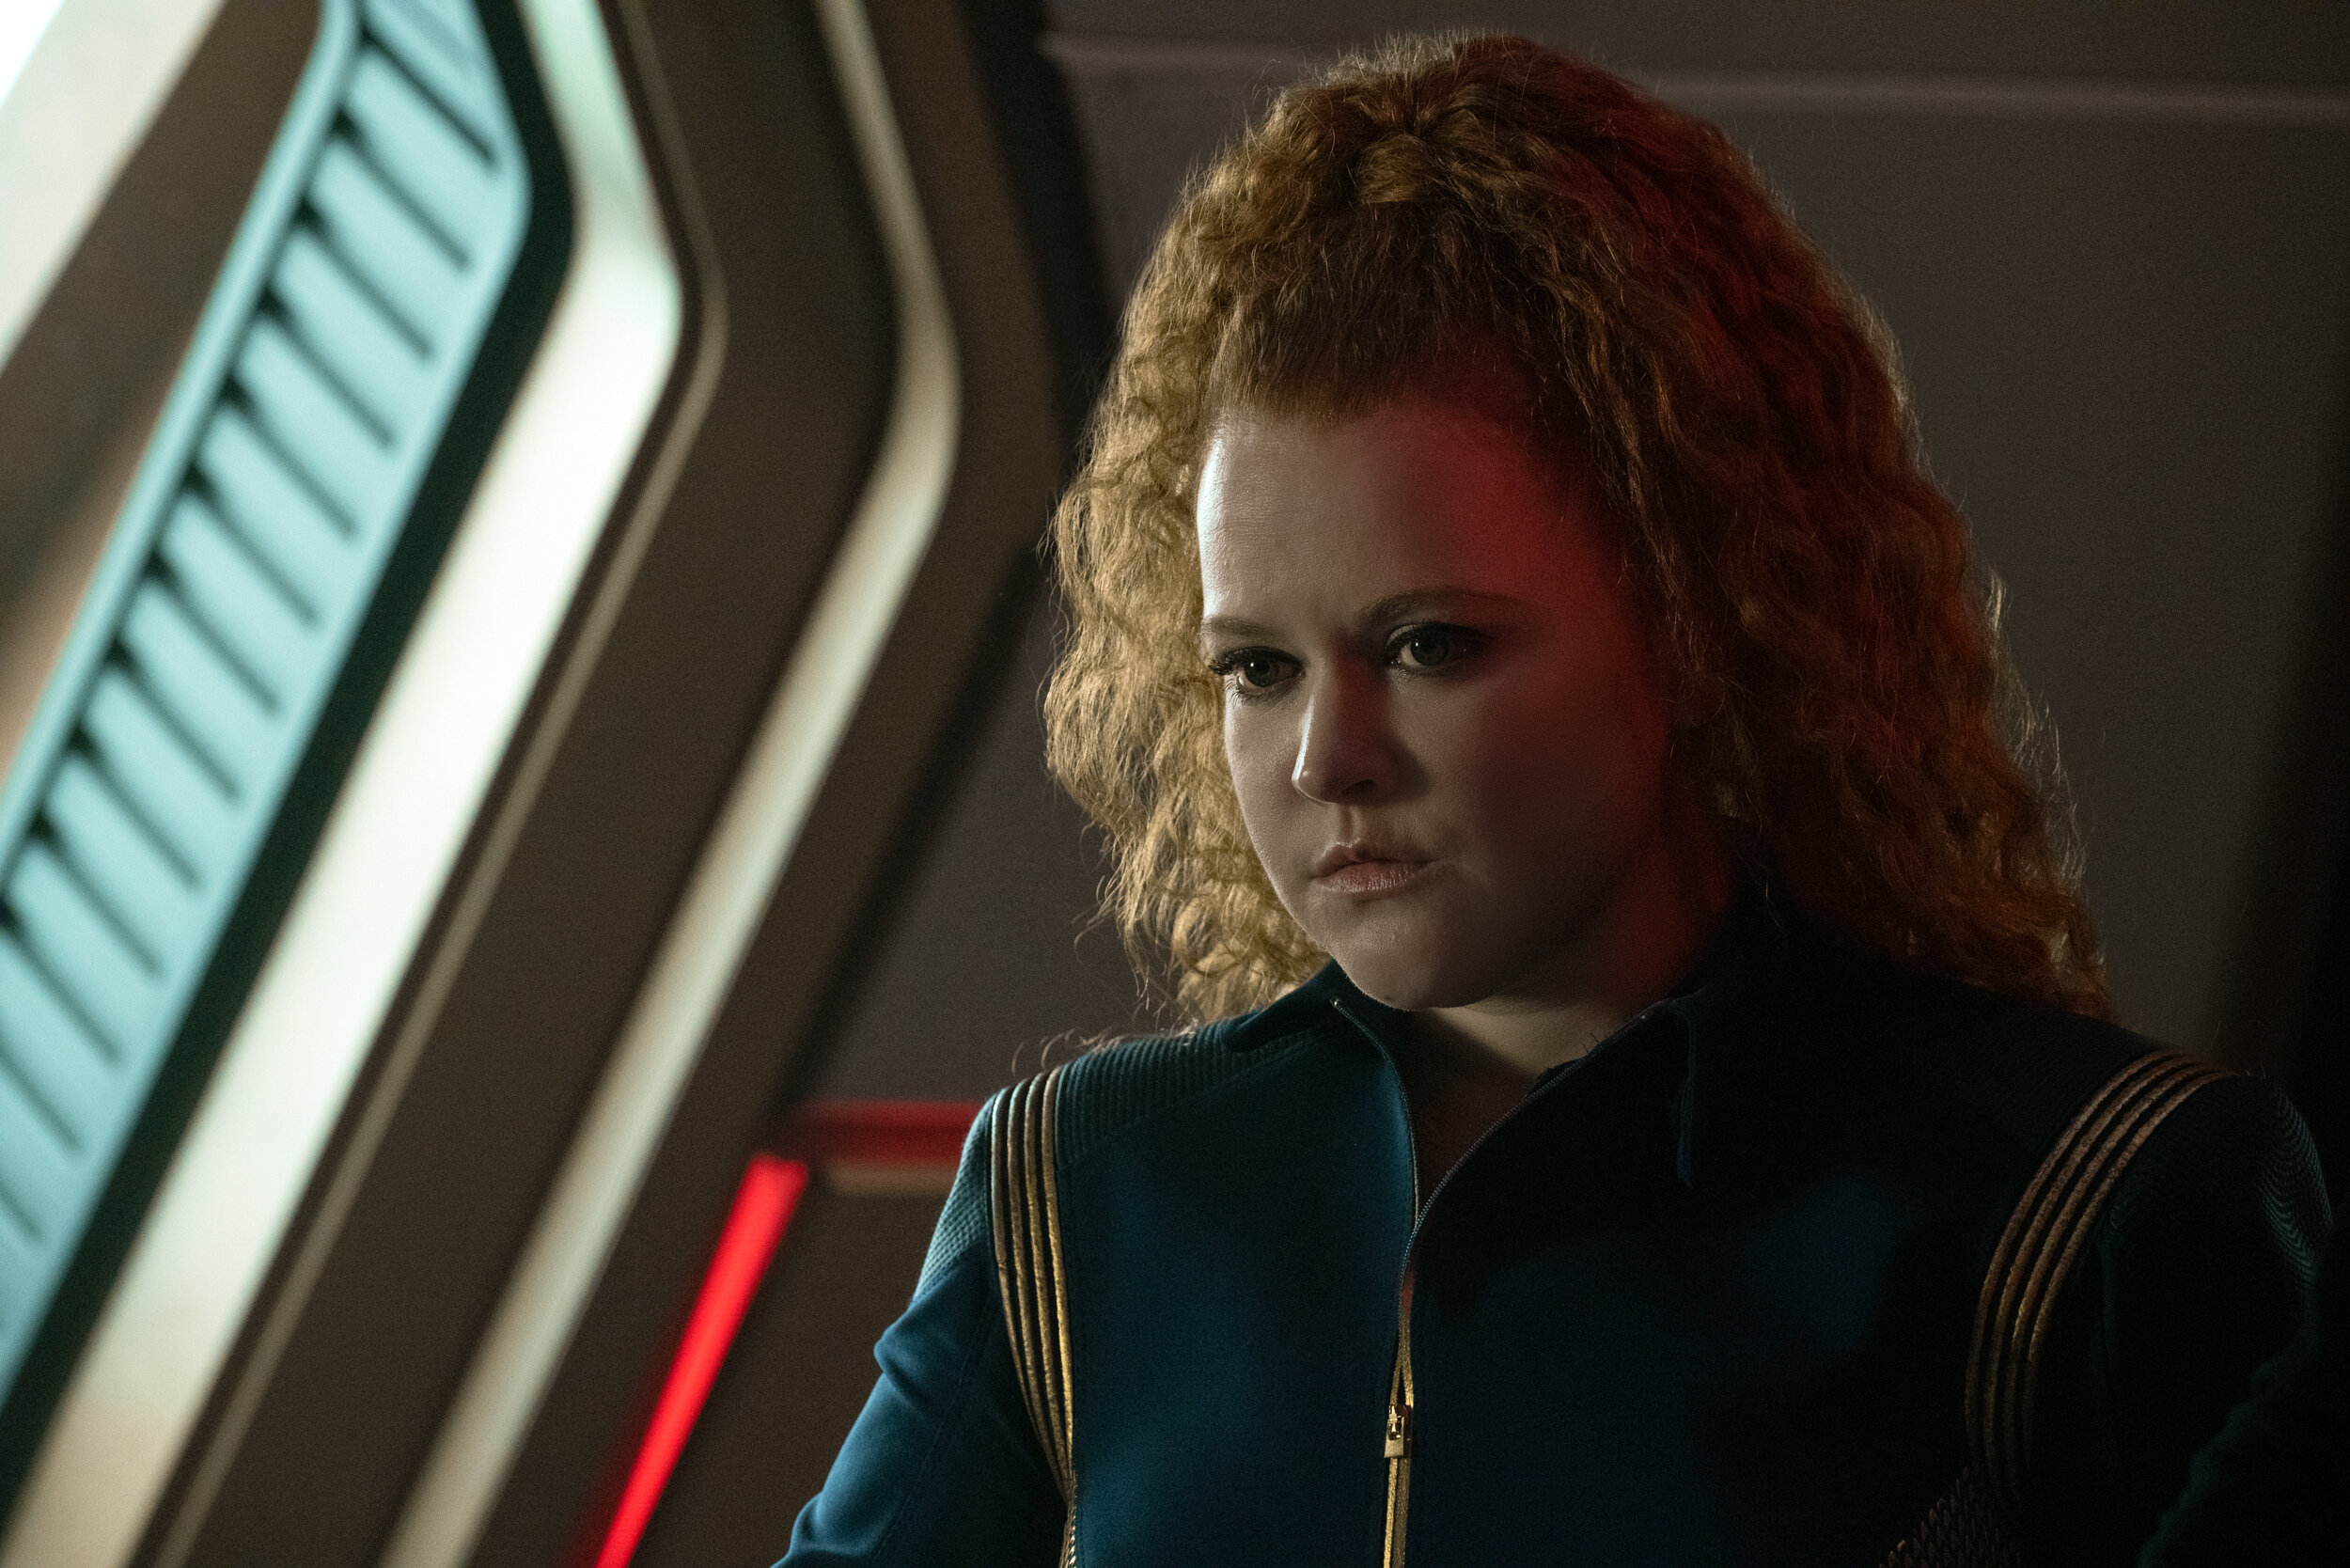   "There Is A Tide..." -- Ep#312 -- Pictured: Mary Wiseman as Ensign Silvia Tilly of the CBS All Access series STAR TREK: DISCOVERY. Photo Cr: Michael Gibson/CBS ©2020 CBS Interactive, Inc. All Rights Reserved.  